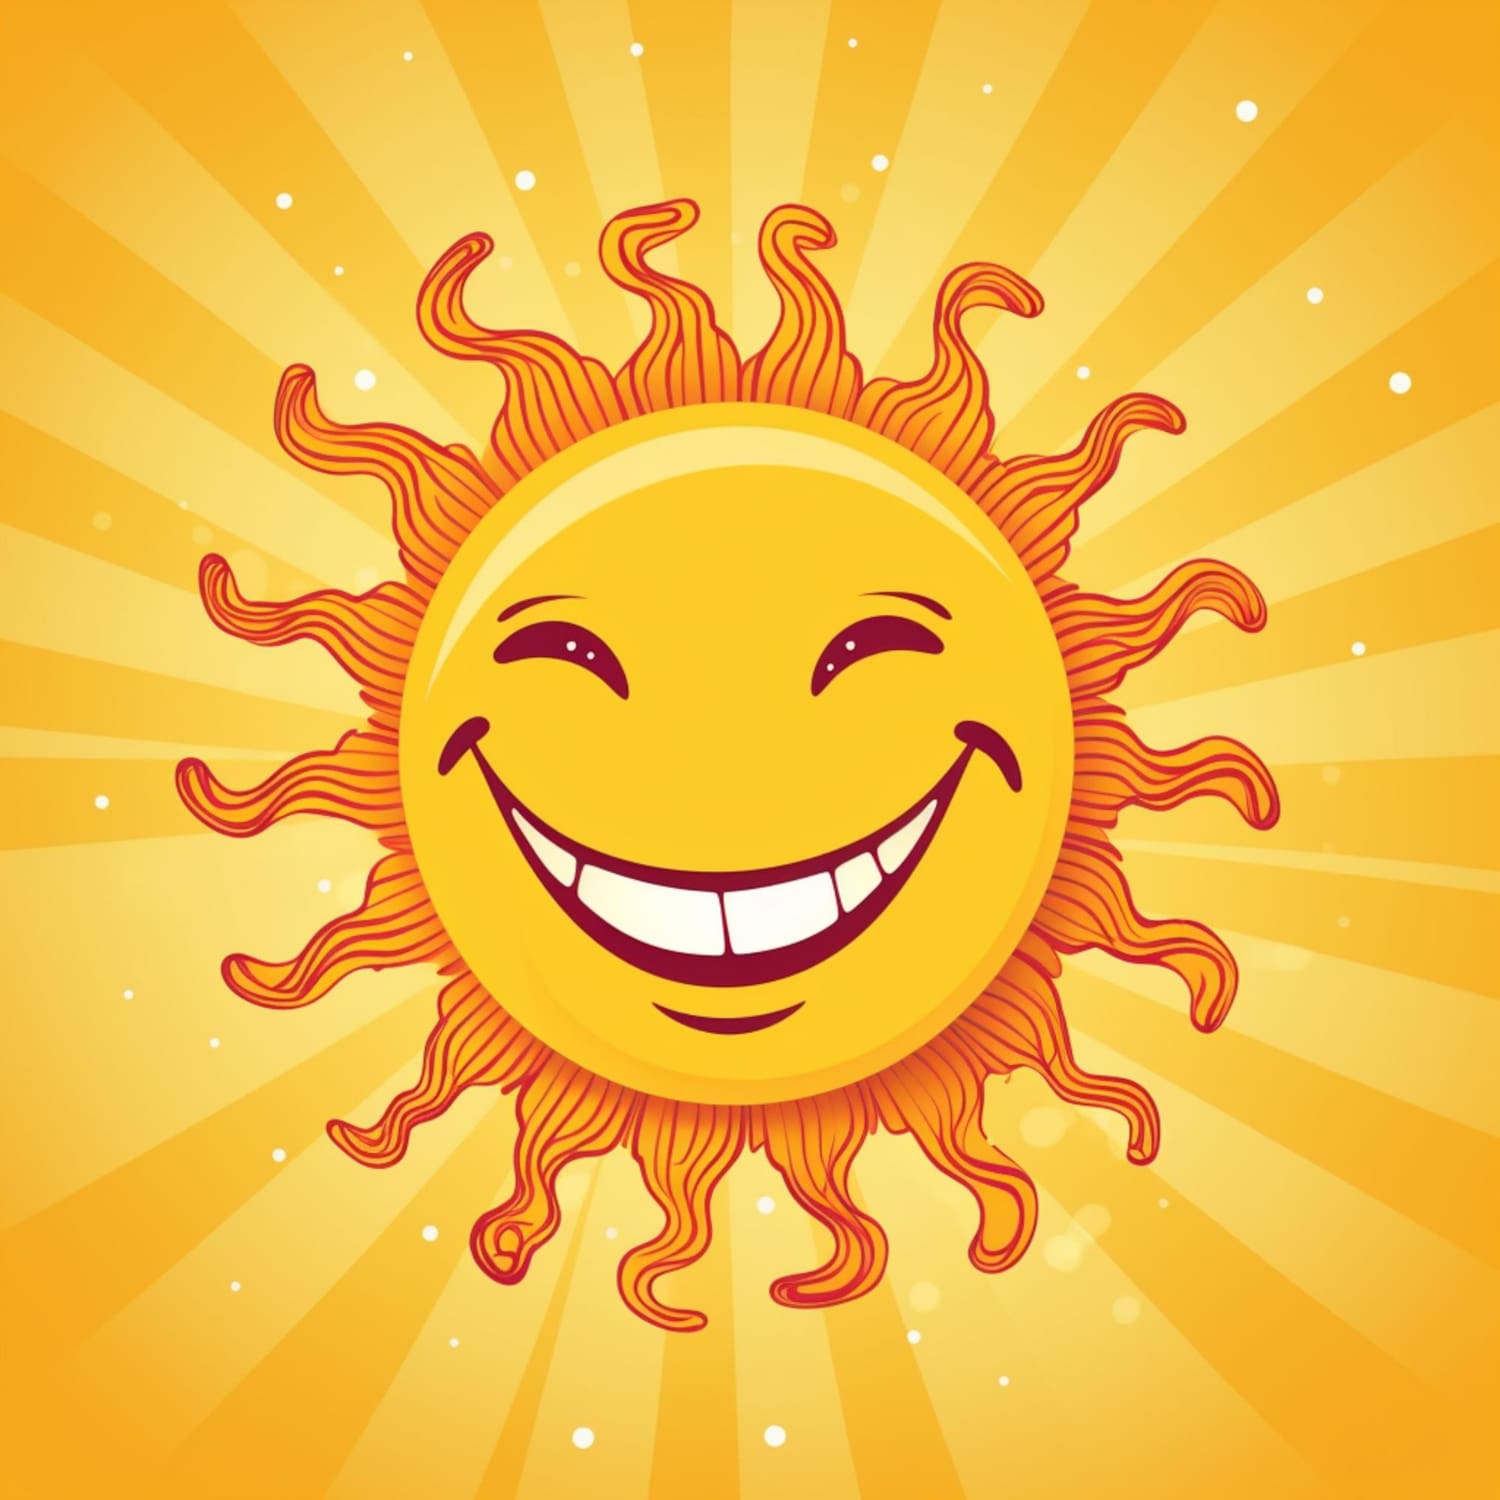 Cartoon graphic of a smiling sun waving goodbye on a bright yellow background.